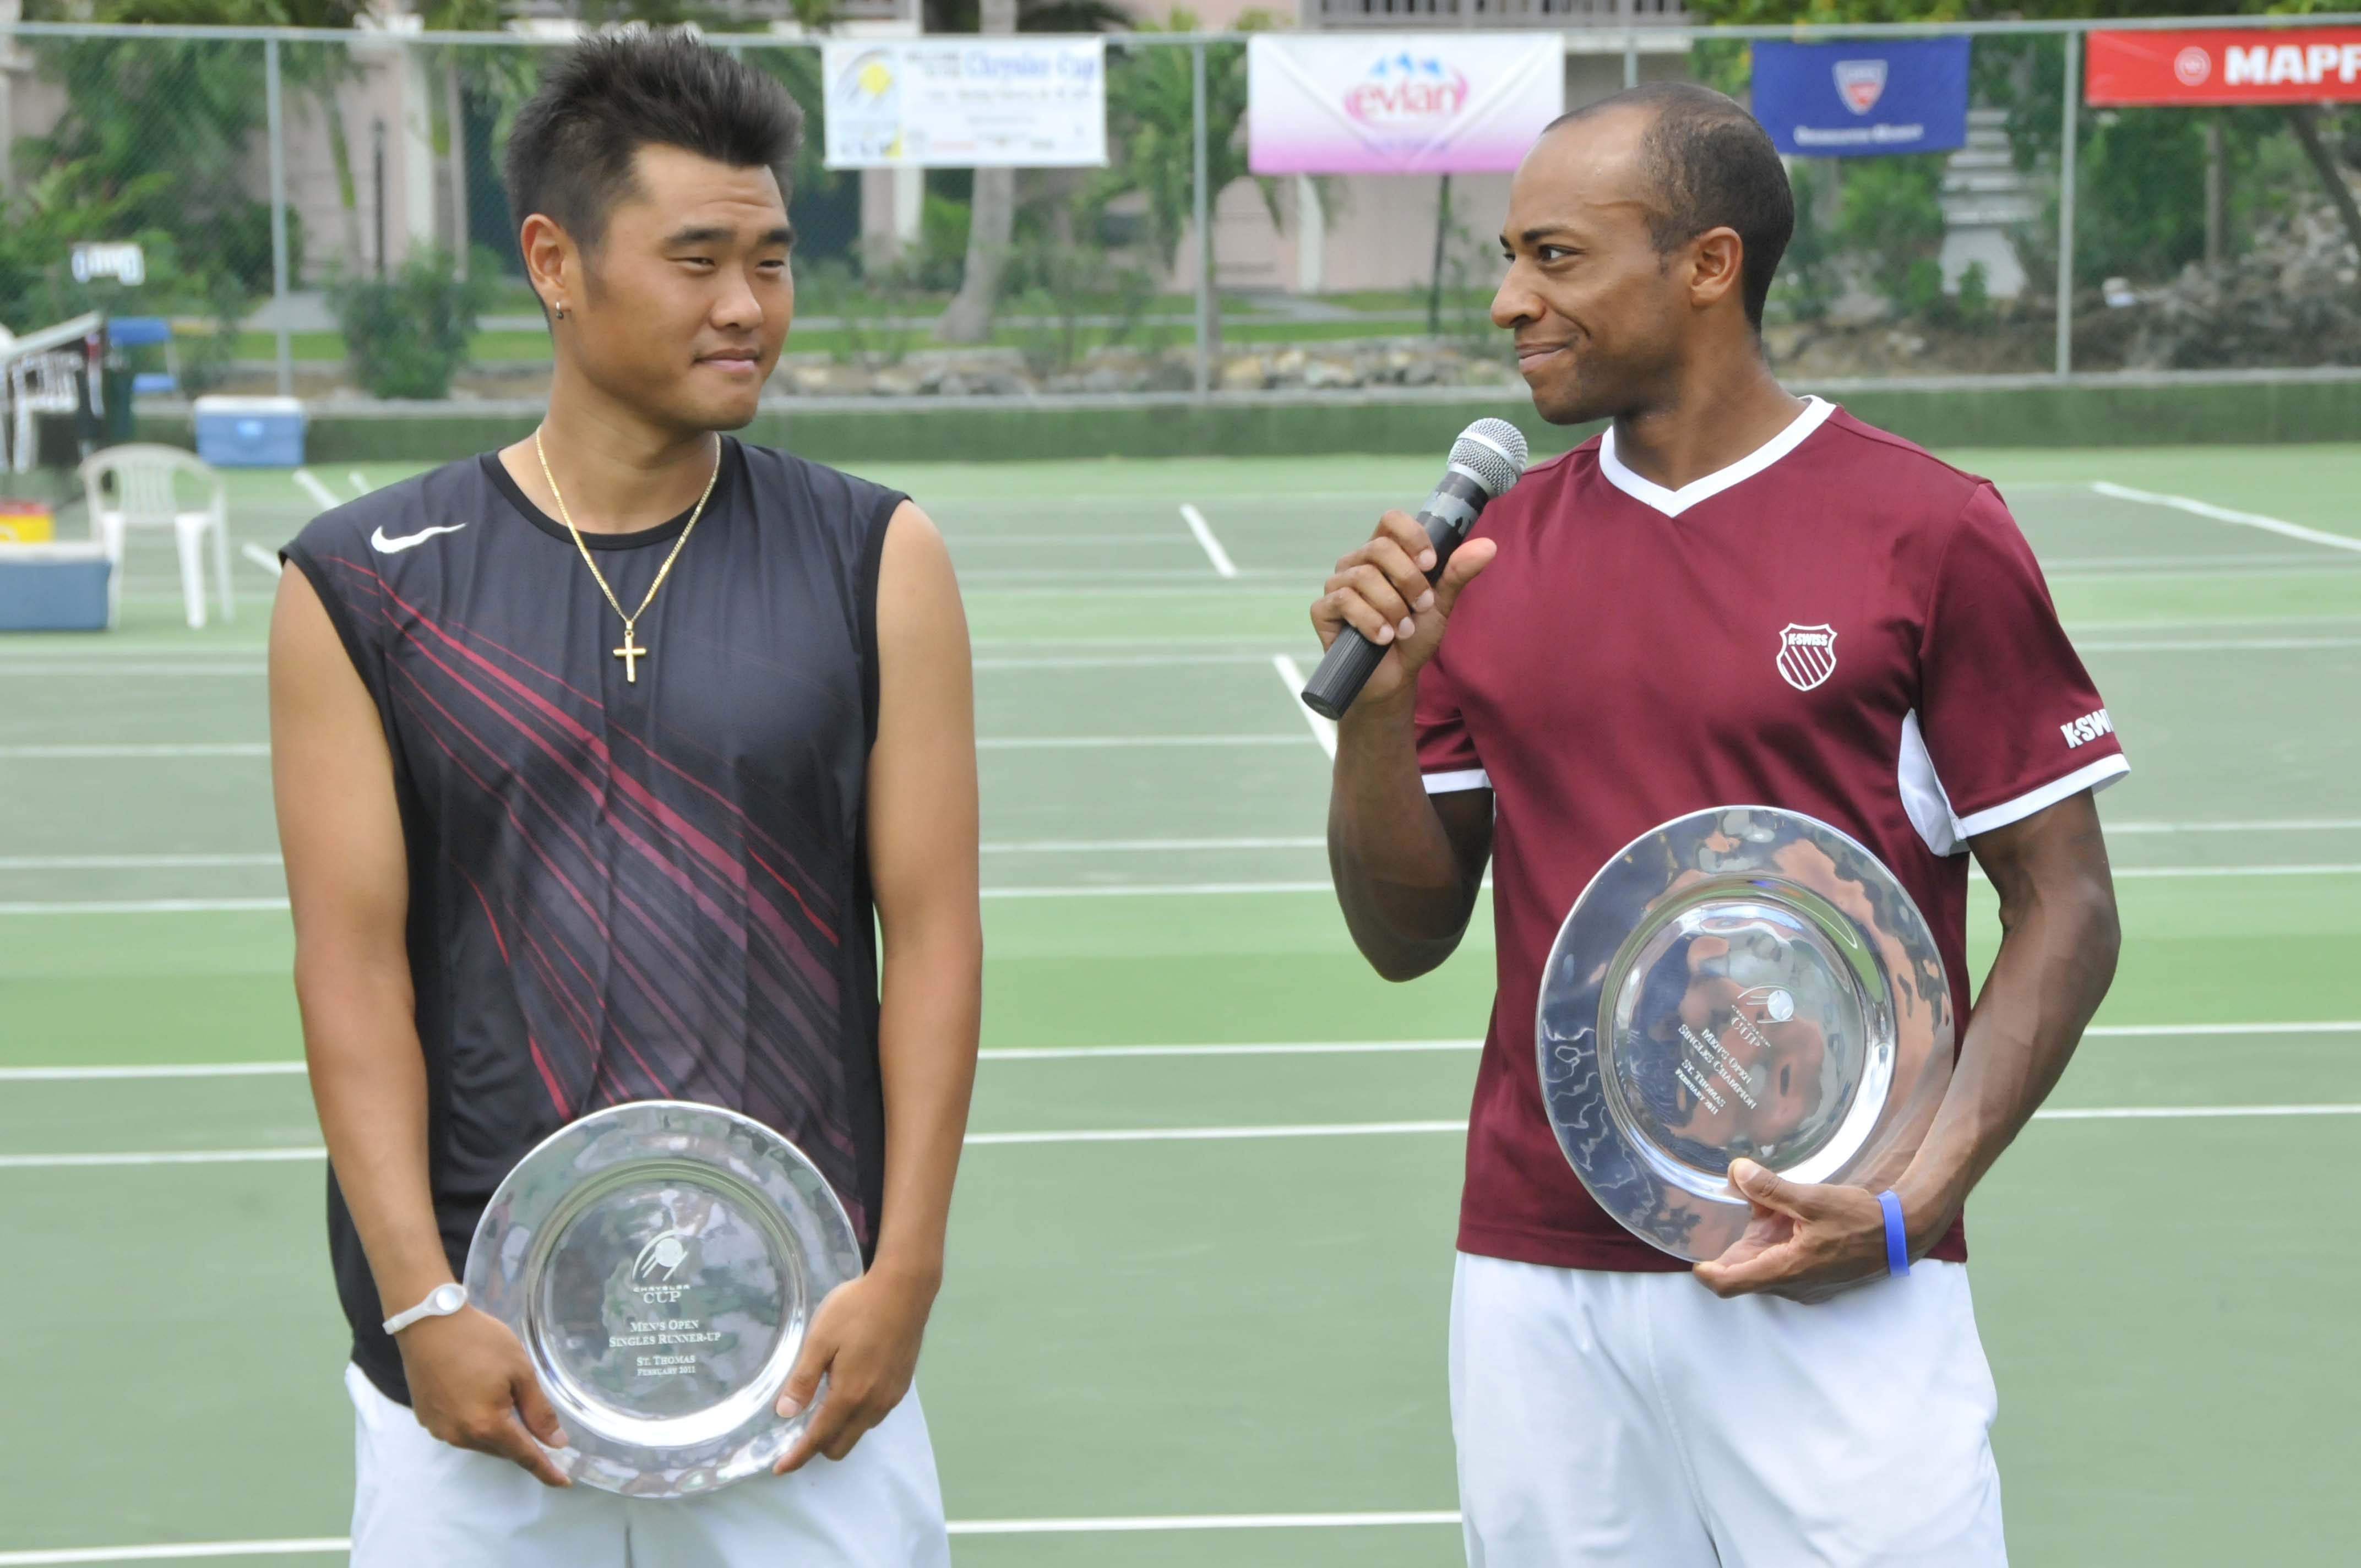 Annual Chrysler Cup Tennis Tournament Winners Named